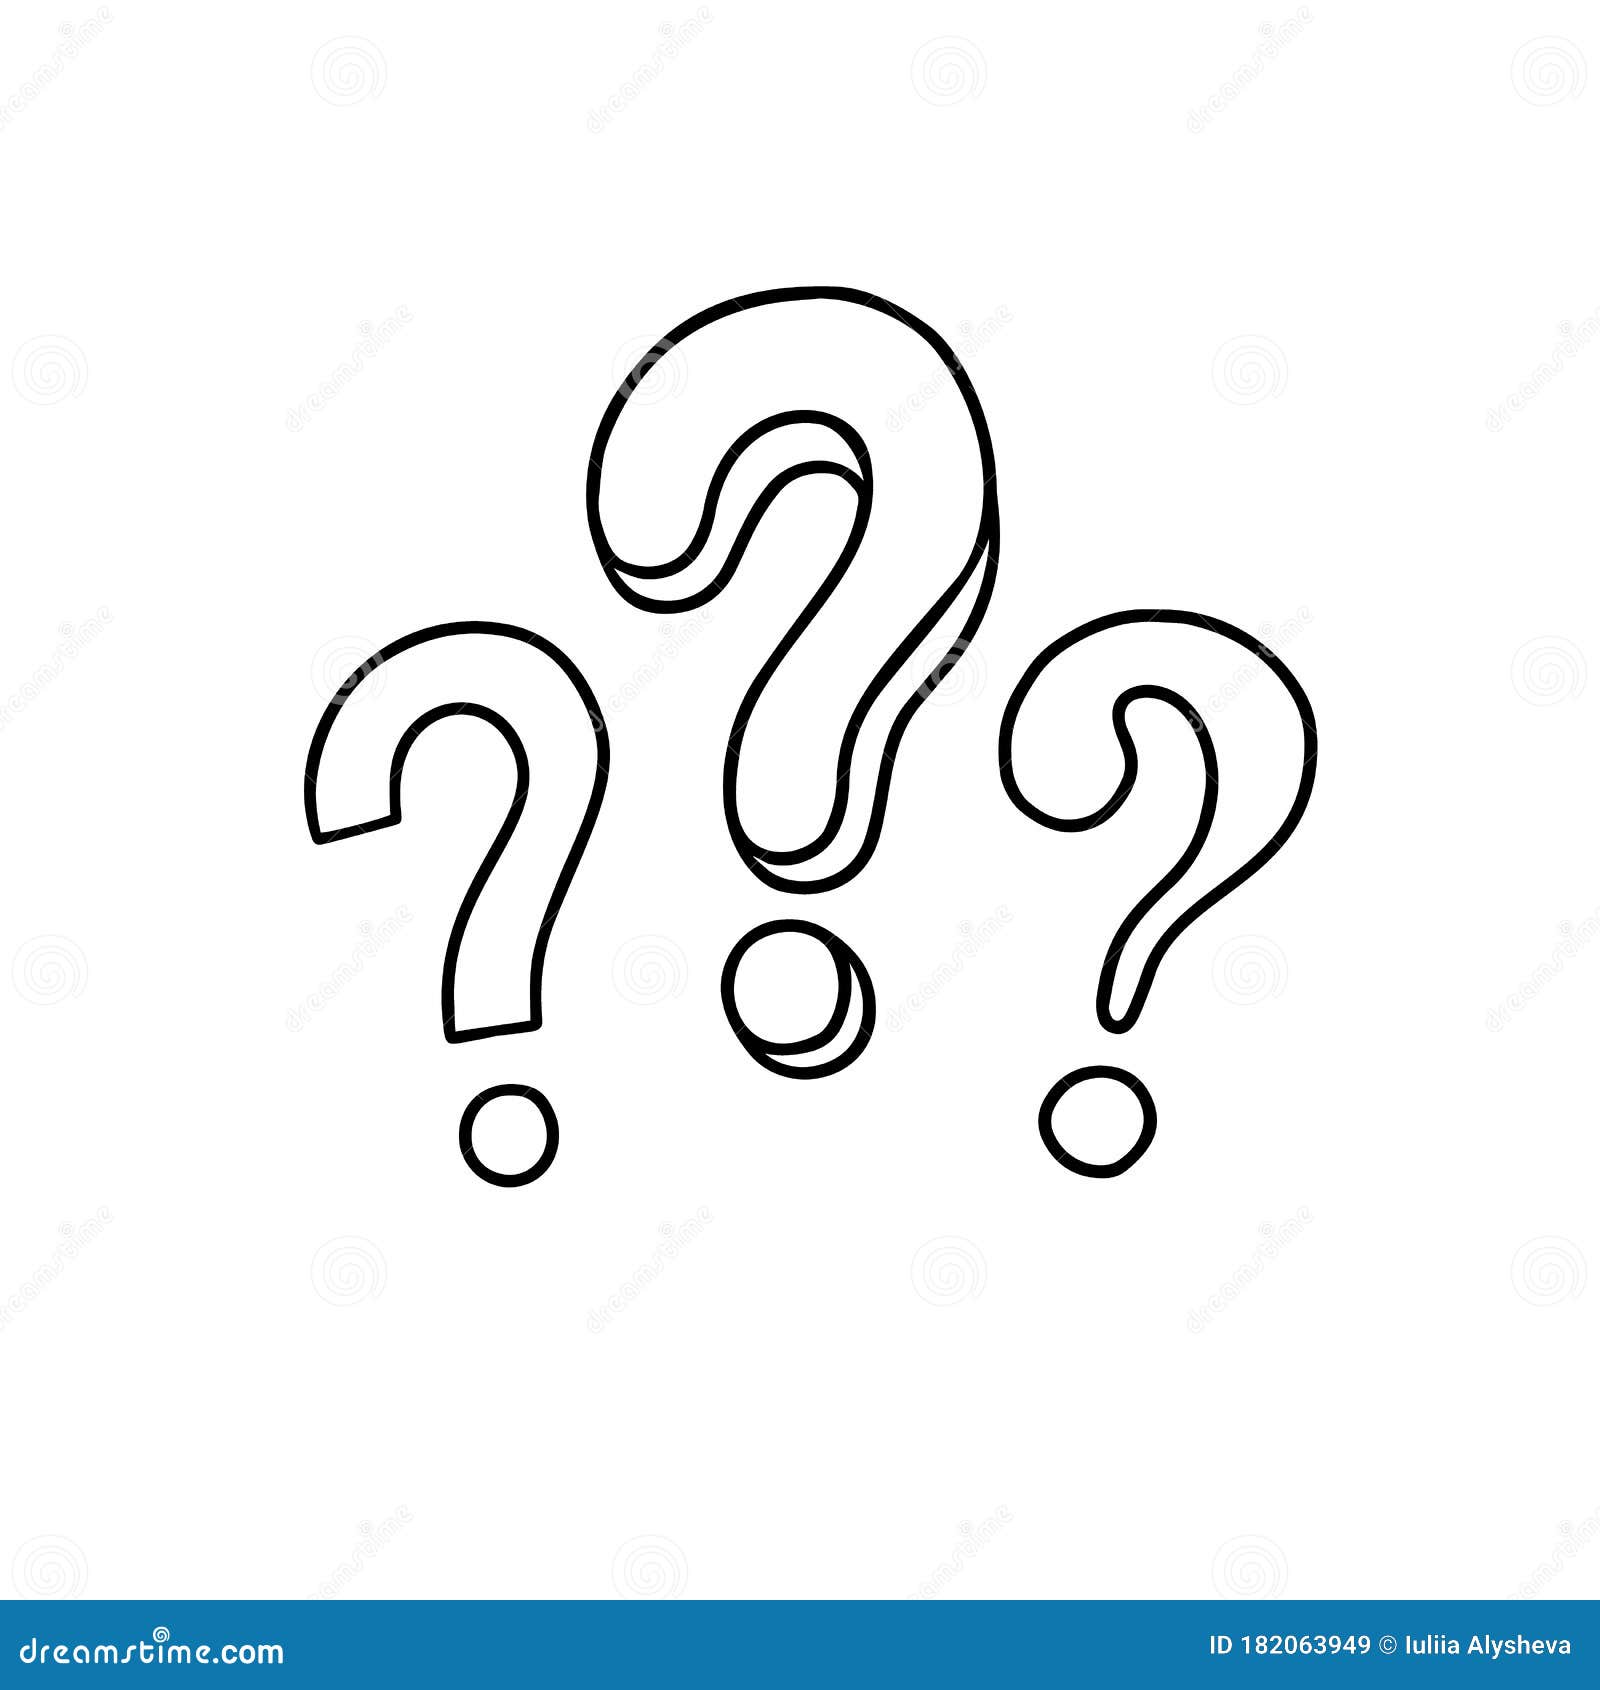 Question Mark Symbol Thoughts Sketch By Stock Vector (Royalty Free)  506780971 | Shutterstock